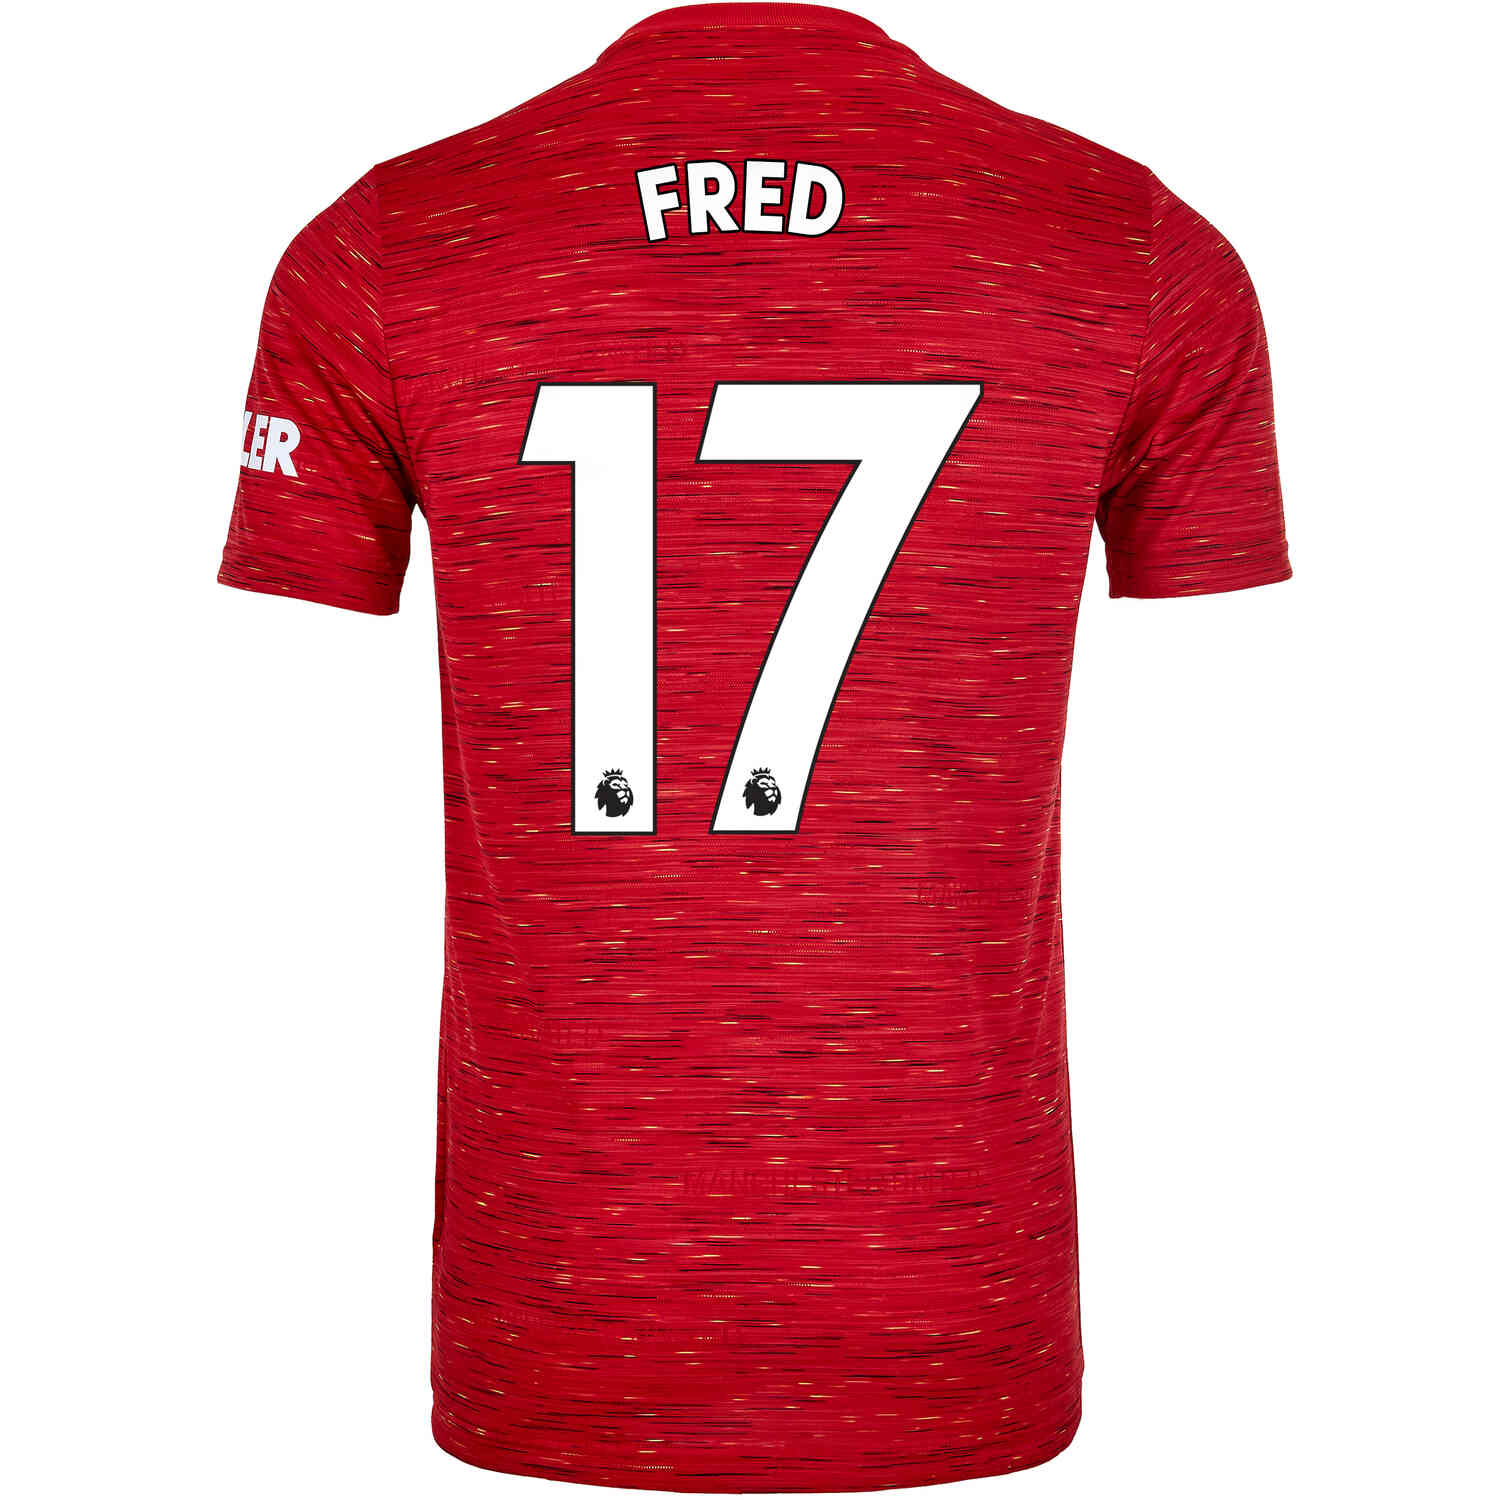 2020/21 adidas Fred Manchester United Home Jersey - SoccerPro